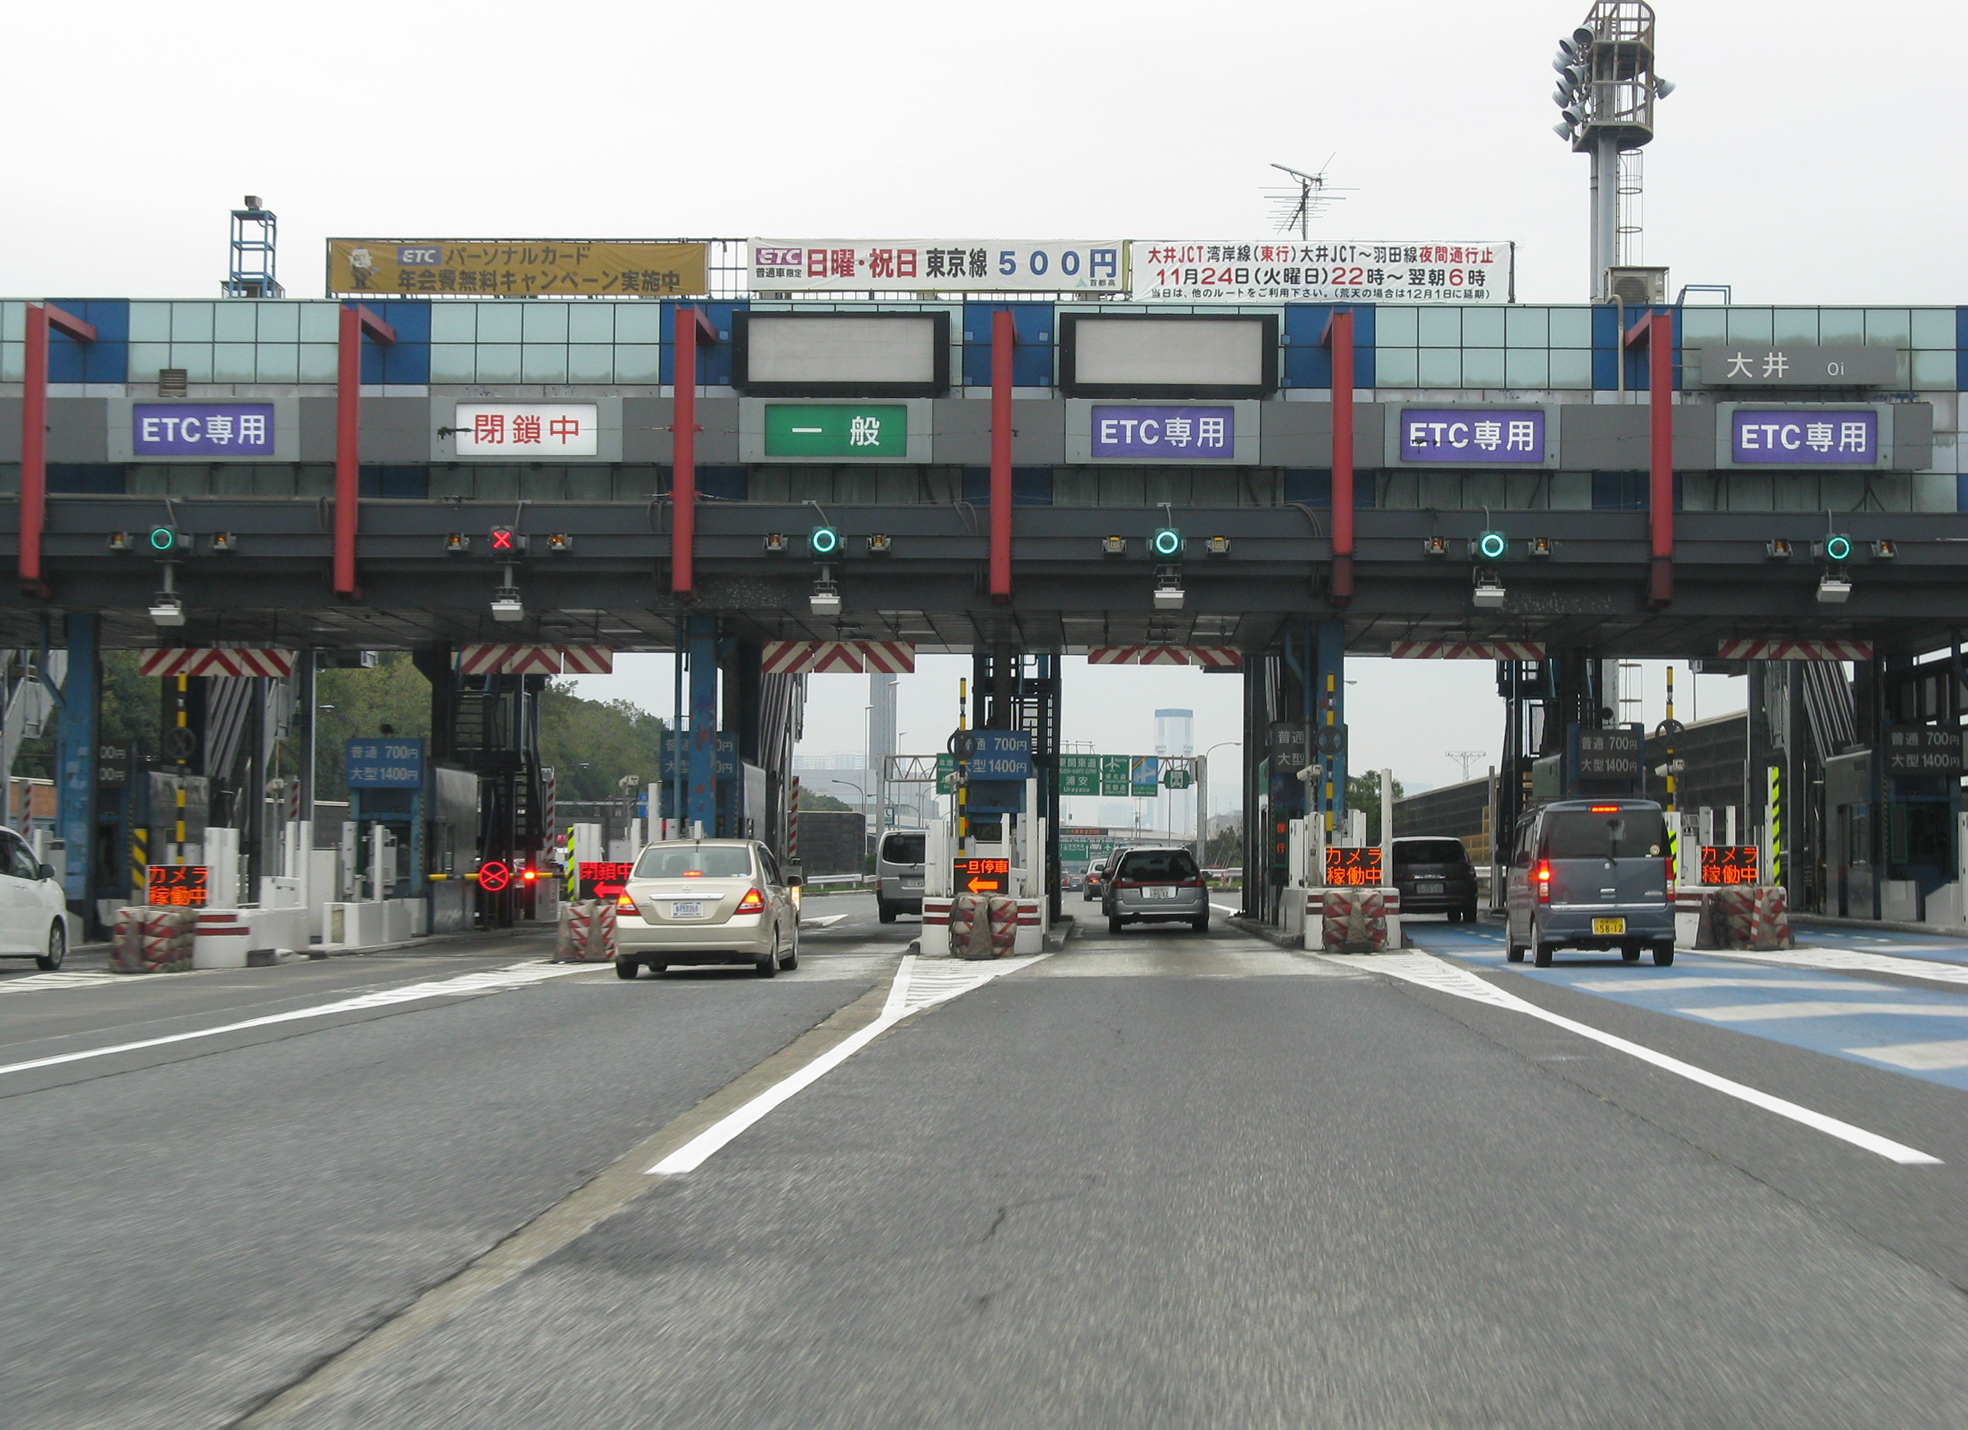 File:Shuto expressway oi toll booth.jpg - Wikimedia Commons